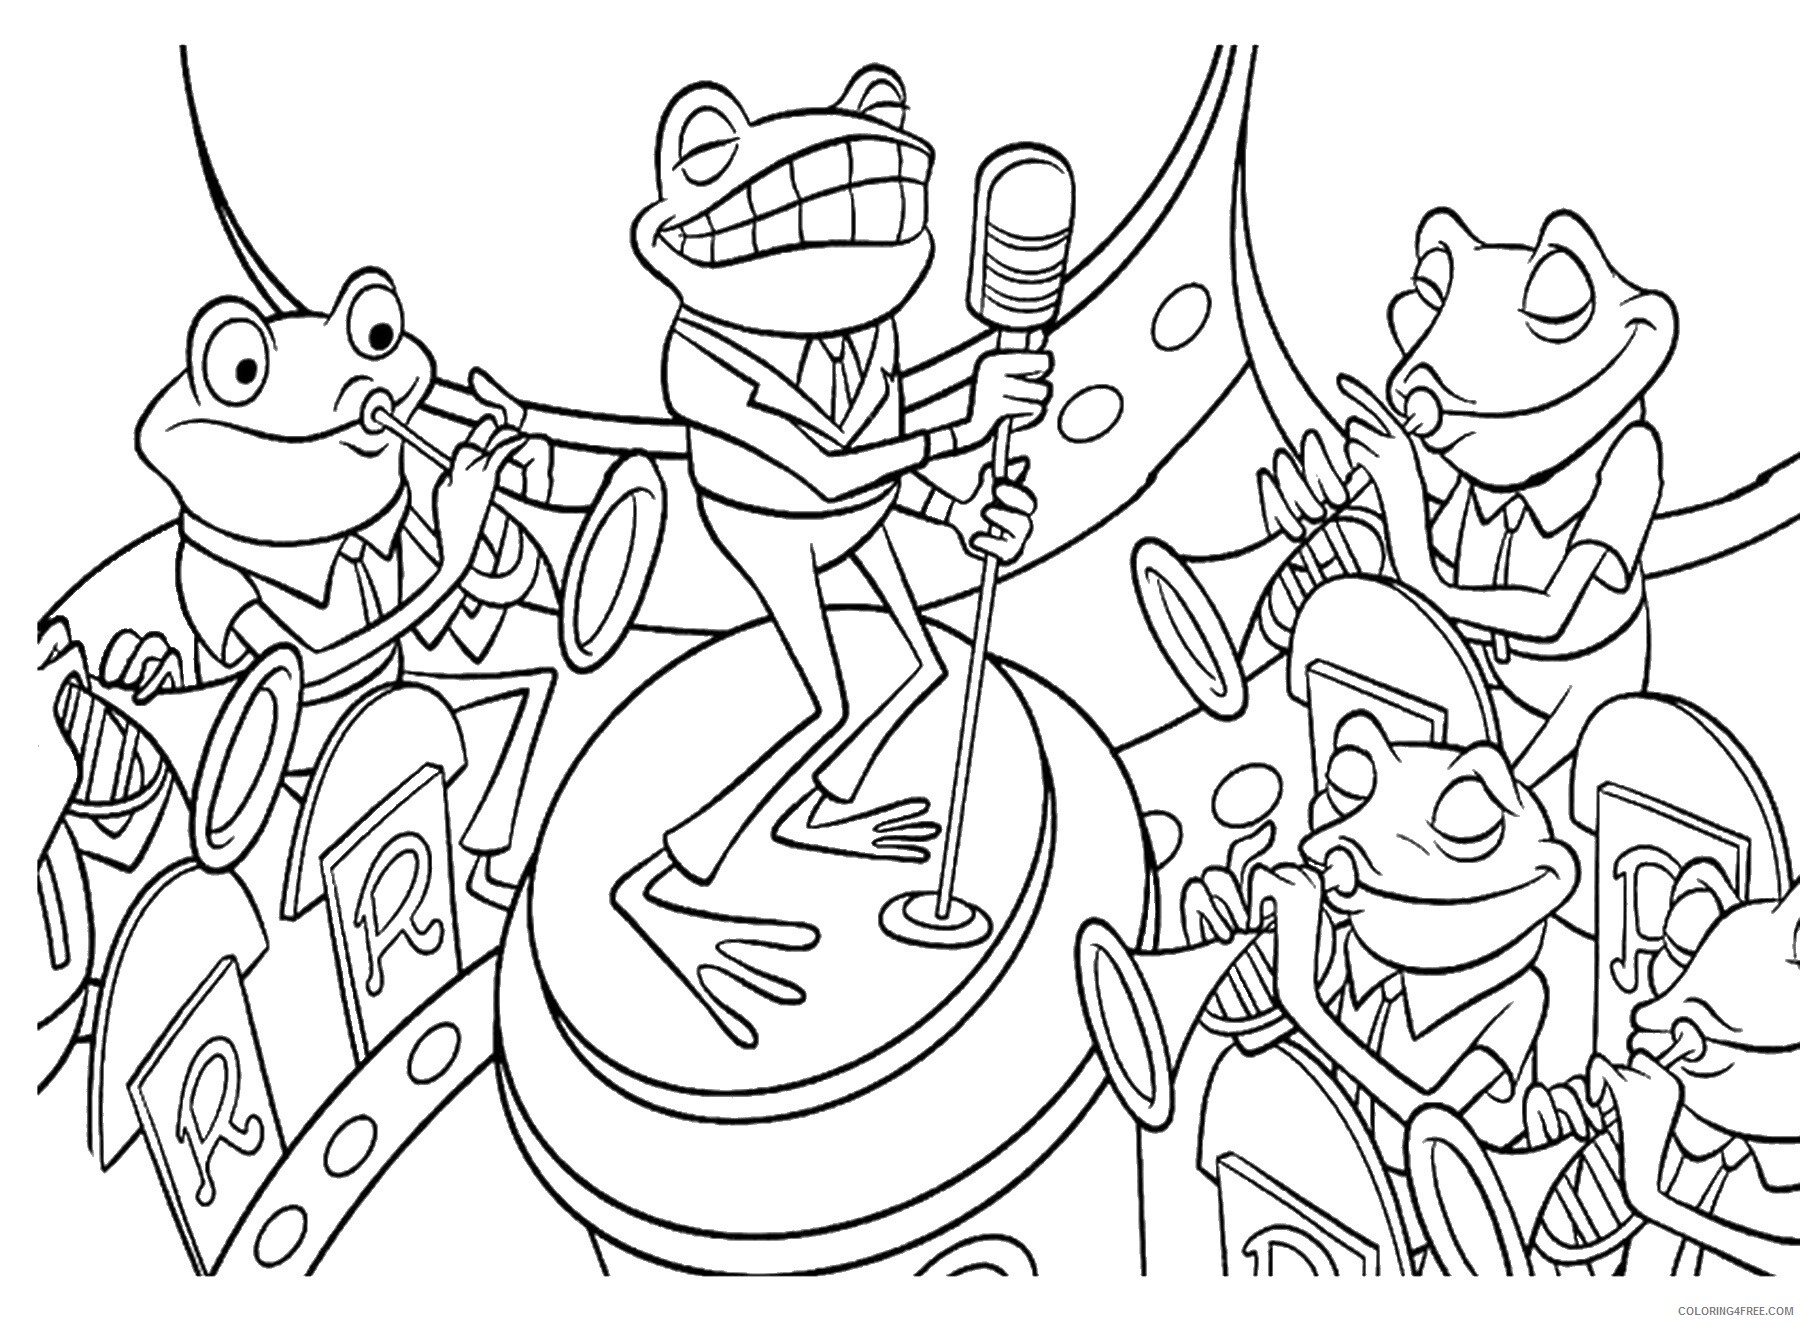 Meet the Robinsons Coloring Pages TV Film Printable 2020 04961 Coloring4free